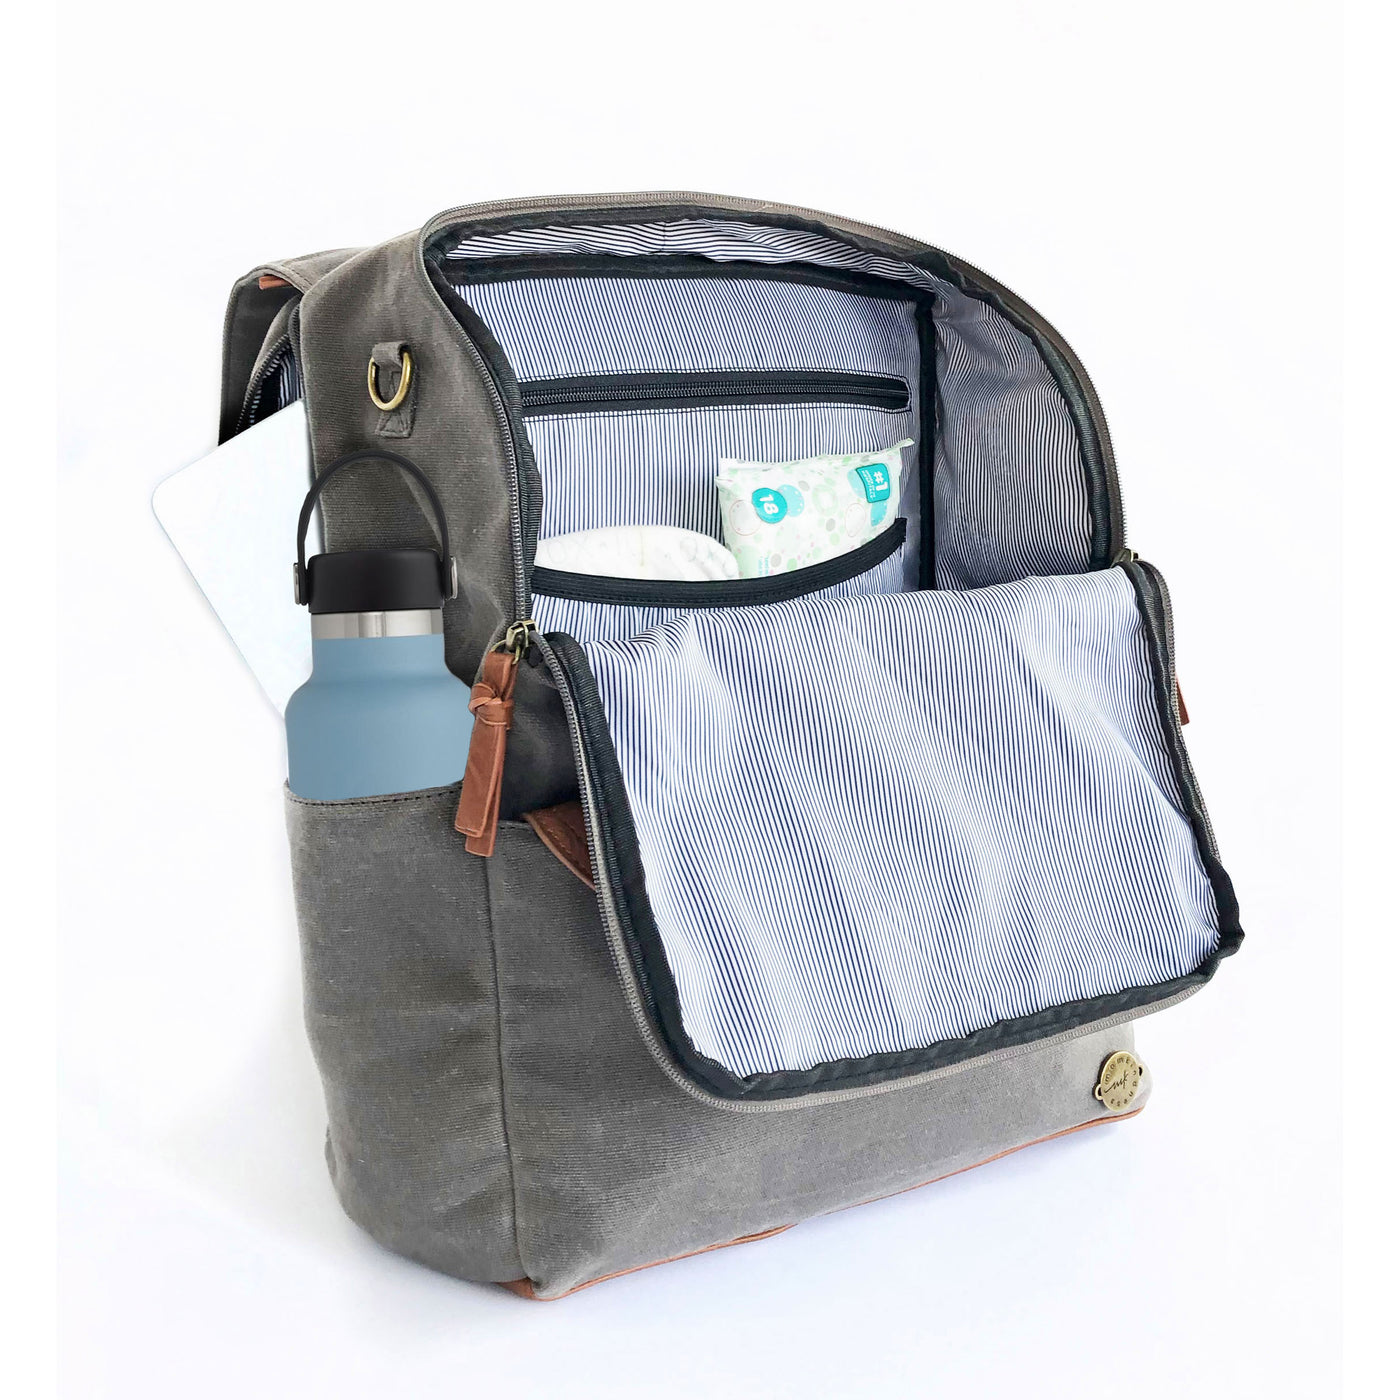 A front-facing 3/4 view of a grey canvas backpack with front flap zipped open showing pockets inside, a water bottle in side pocket, and a laptop in separate back compartment. Wipe-clean lining is a thin black and white stripe pattern with black accents. Image shown on a white background.